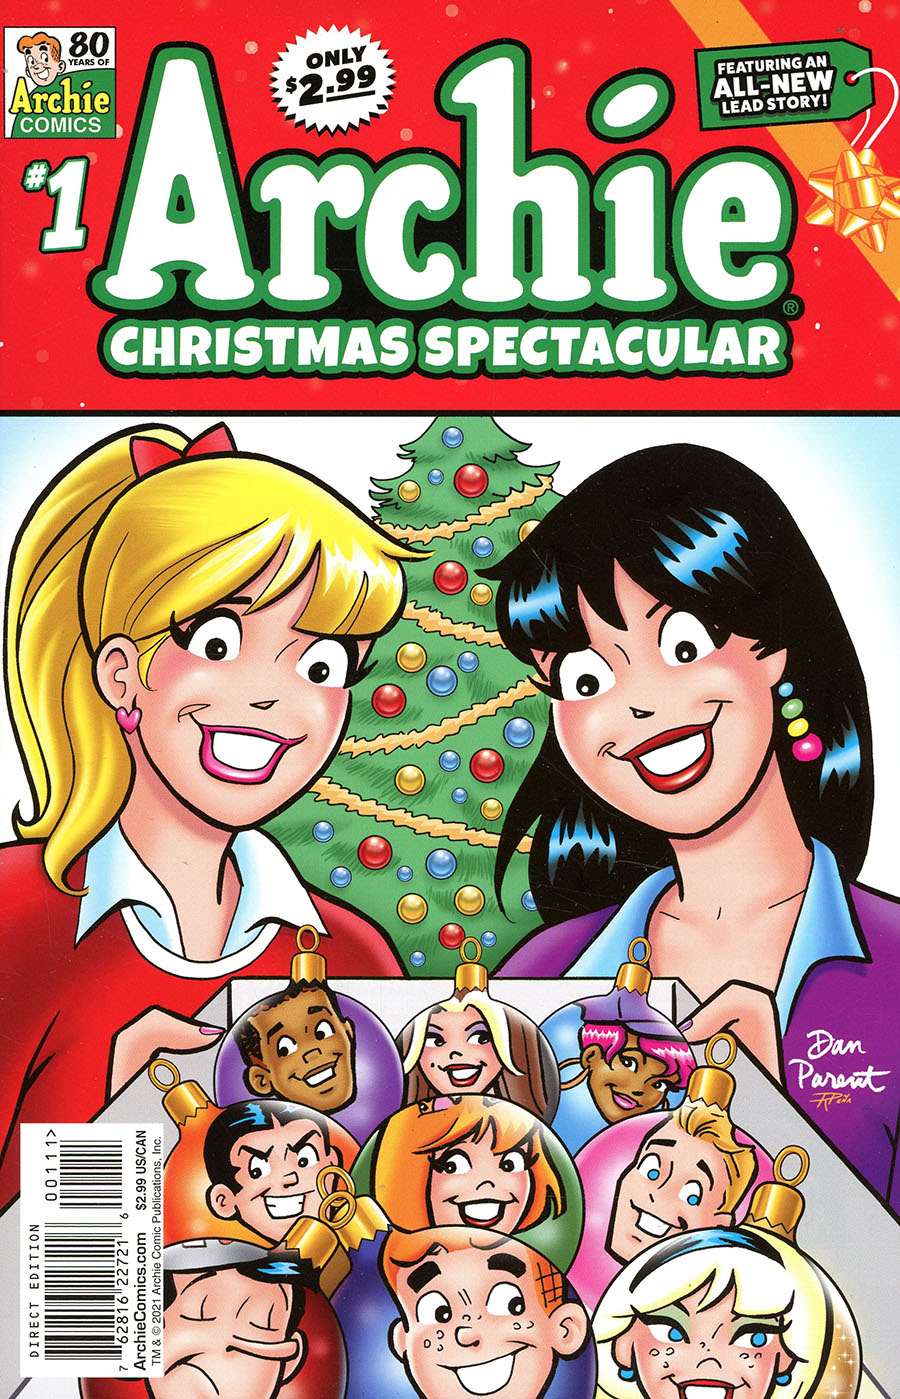 Archies Christmas Spectacular 2021 #1 (One Shot)